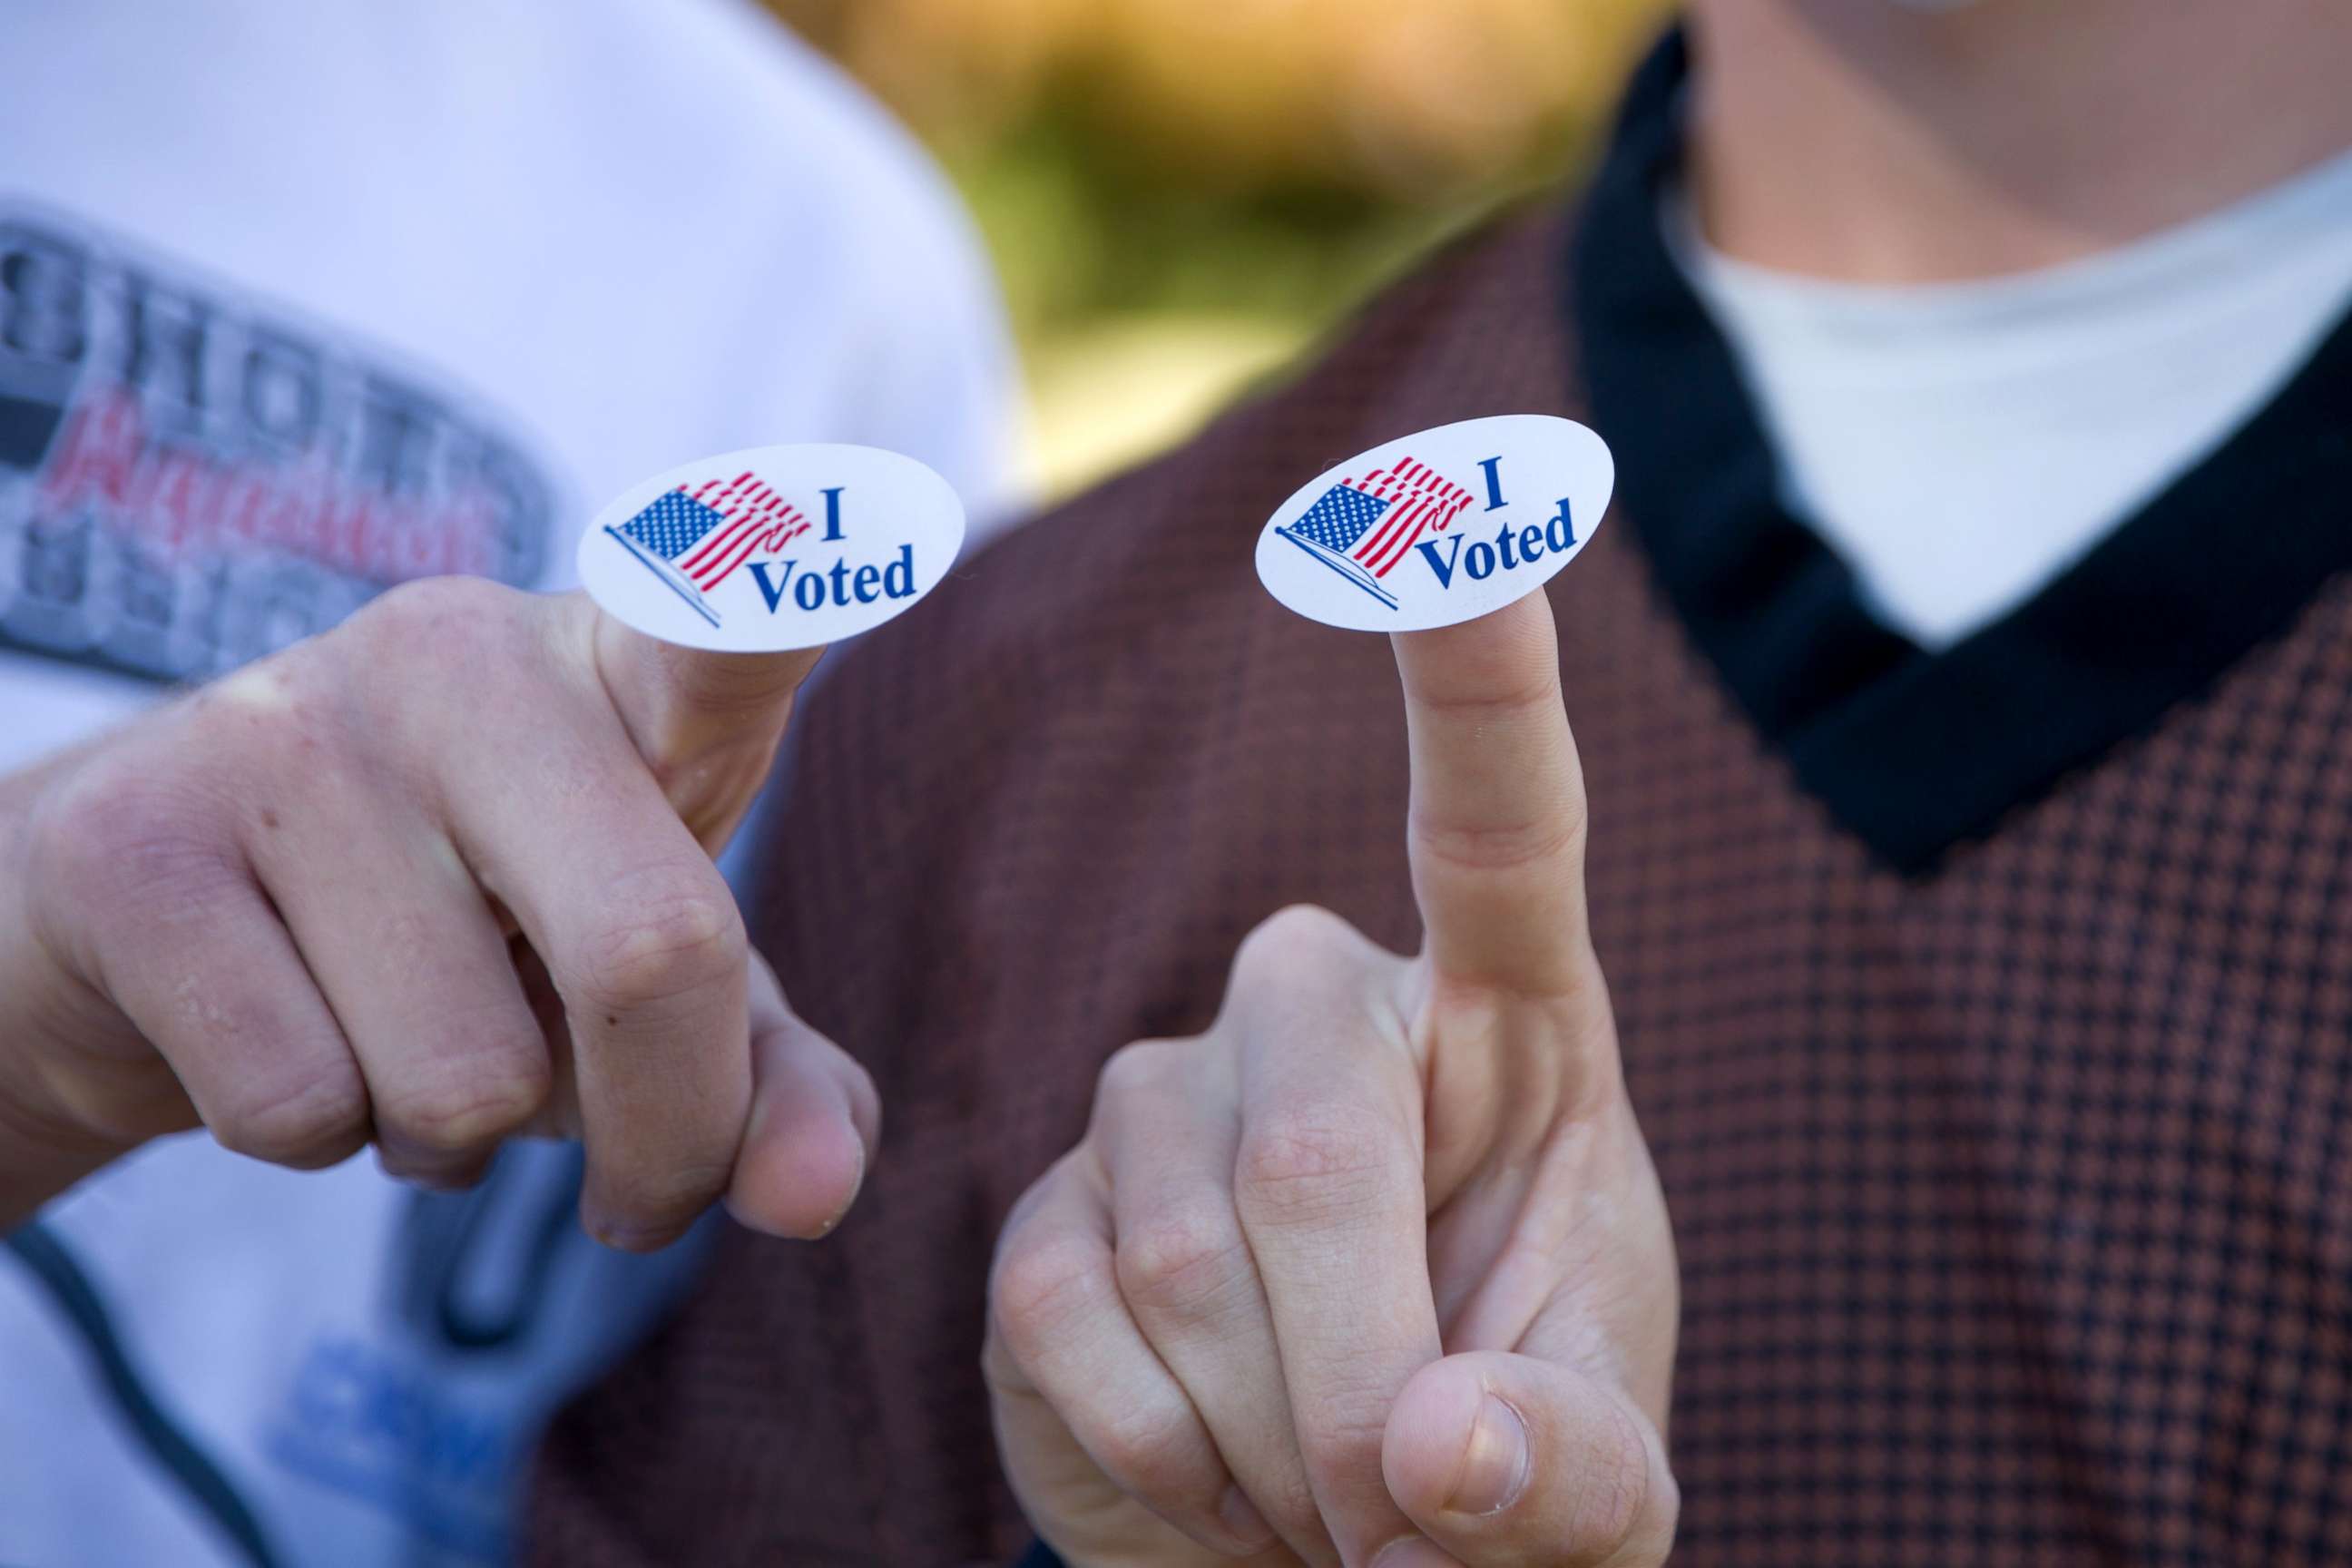 PHOTO: Young voters show the "I Voted" stickers after voting at a polling station in Plano, Texas, Nov. 3, 2020.